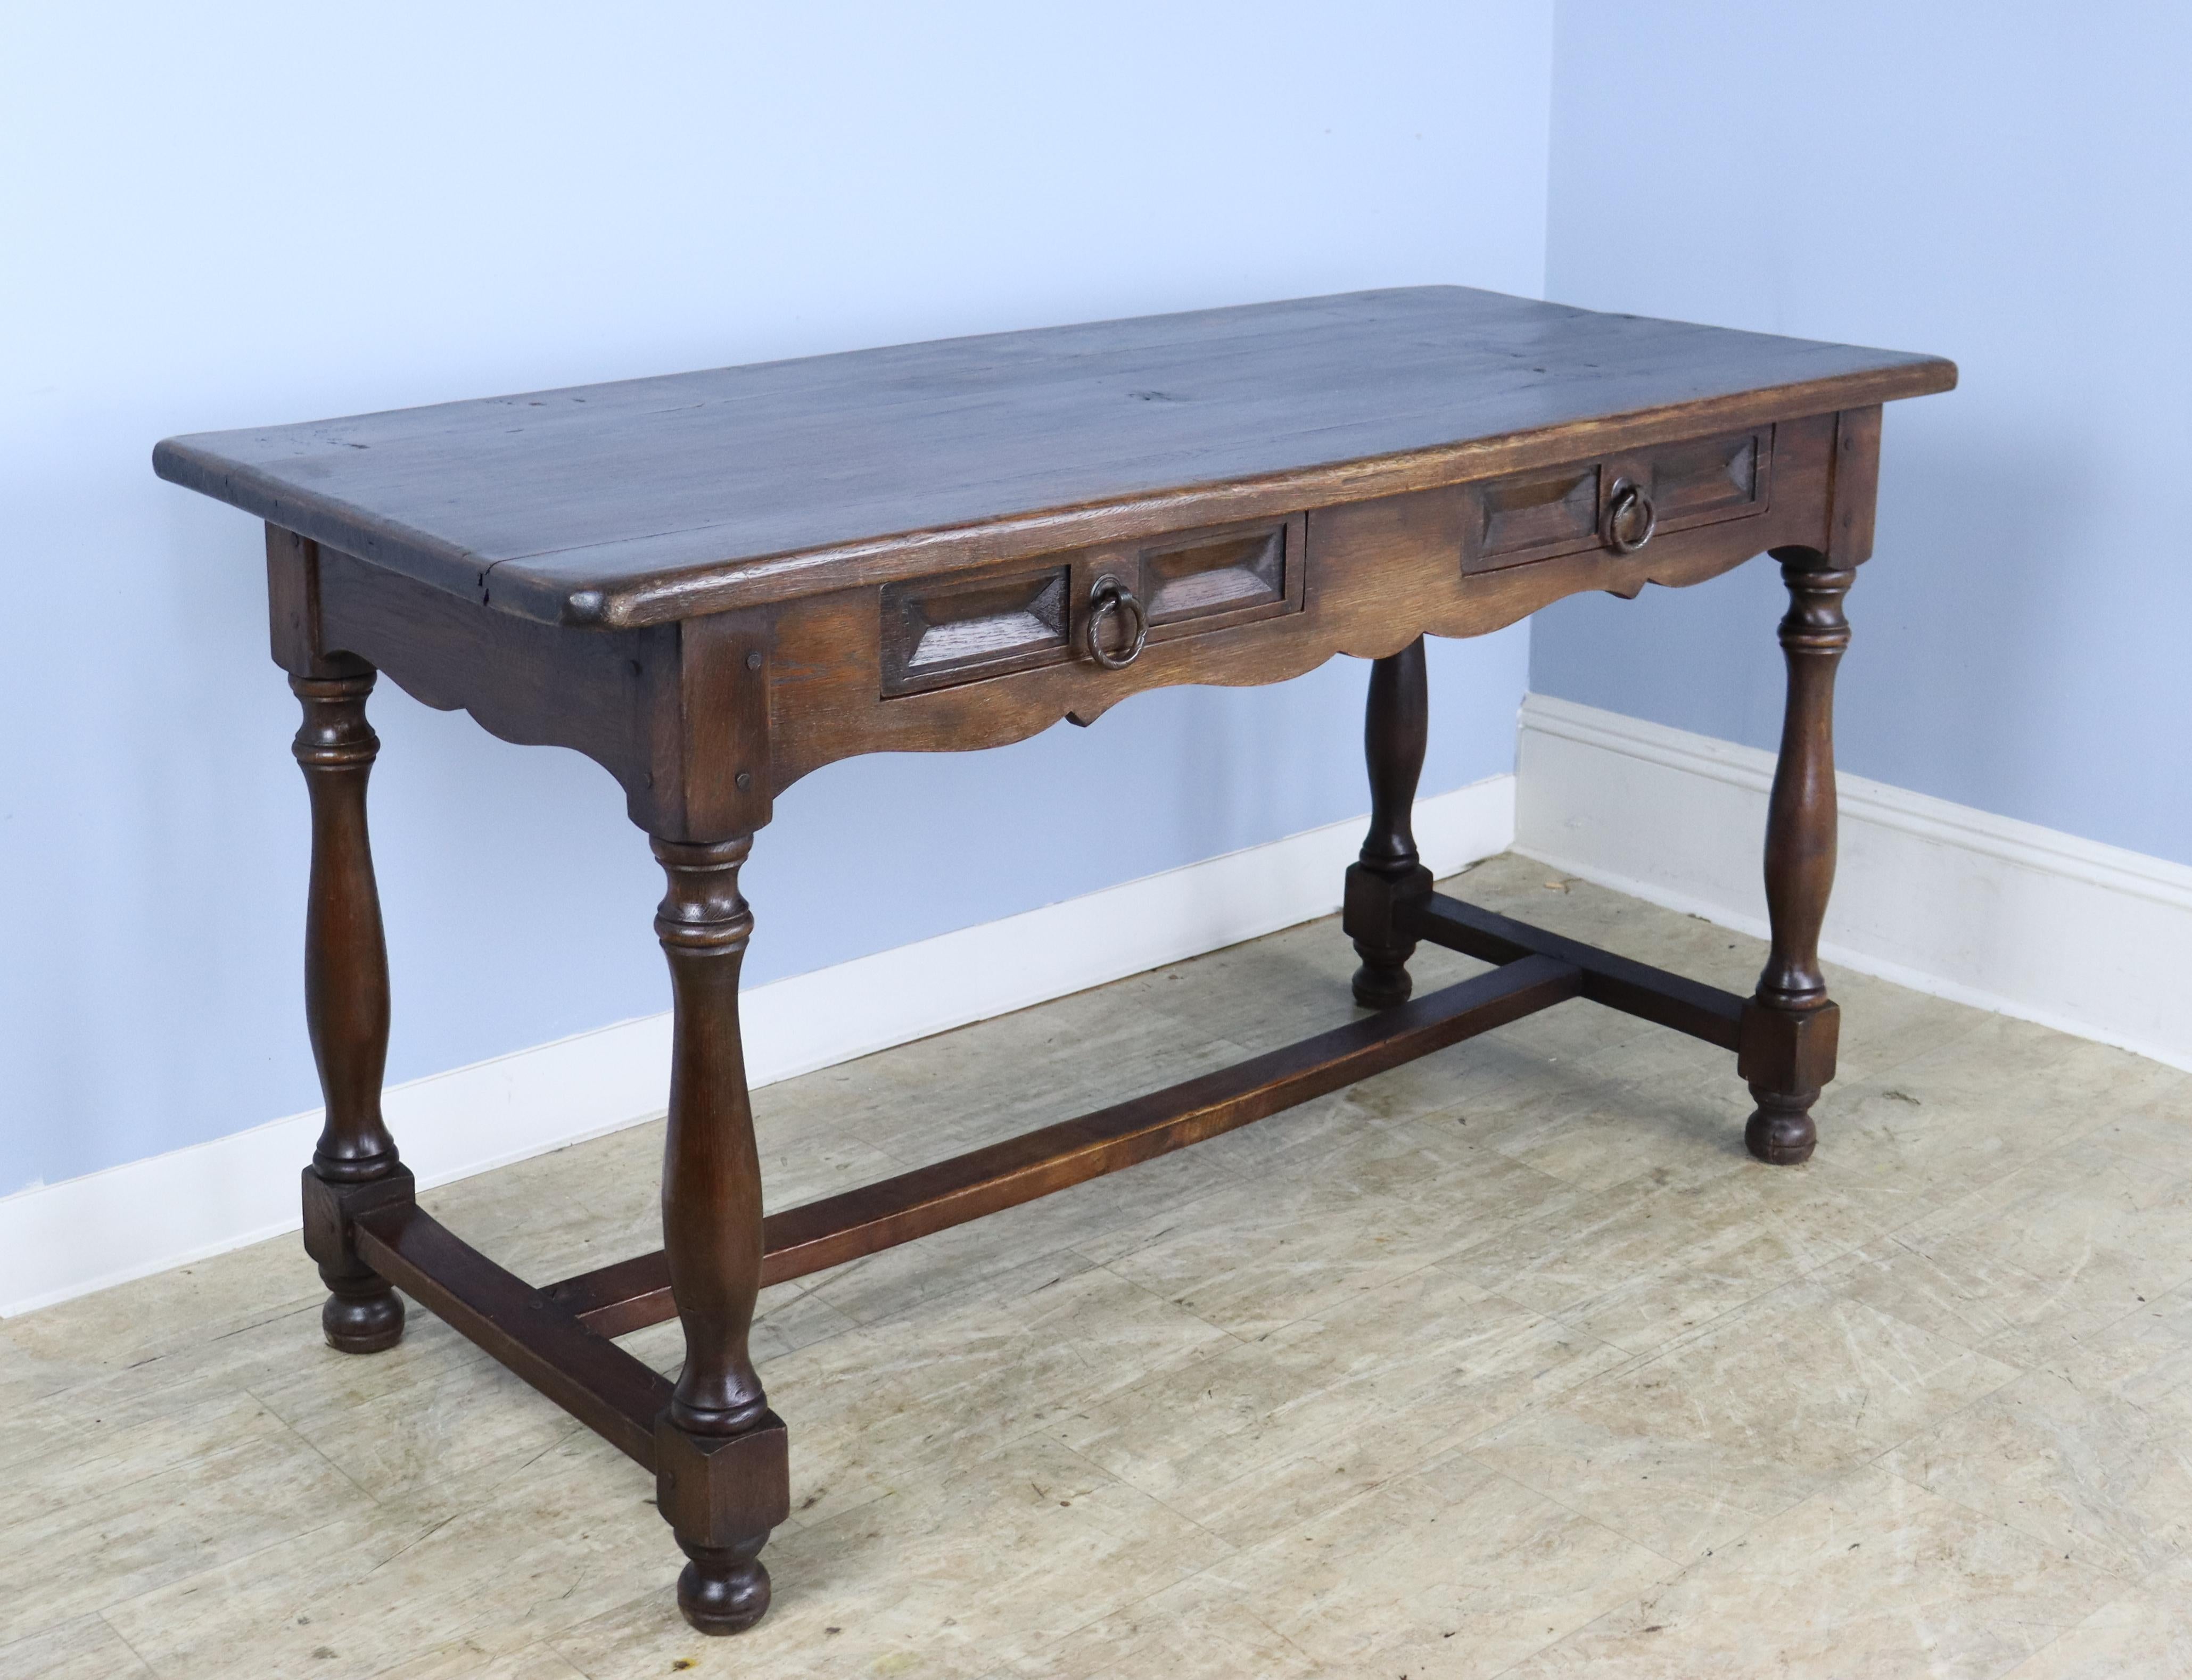 A handsome dark oak and chestnut Spanish desk with a trestle base and fancifully carved apron. Well finished, paneled back and 24 inch apron. A beautiful and stylish work surface.